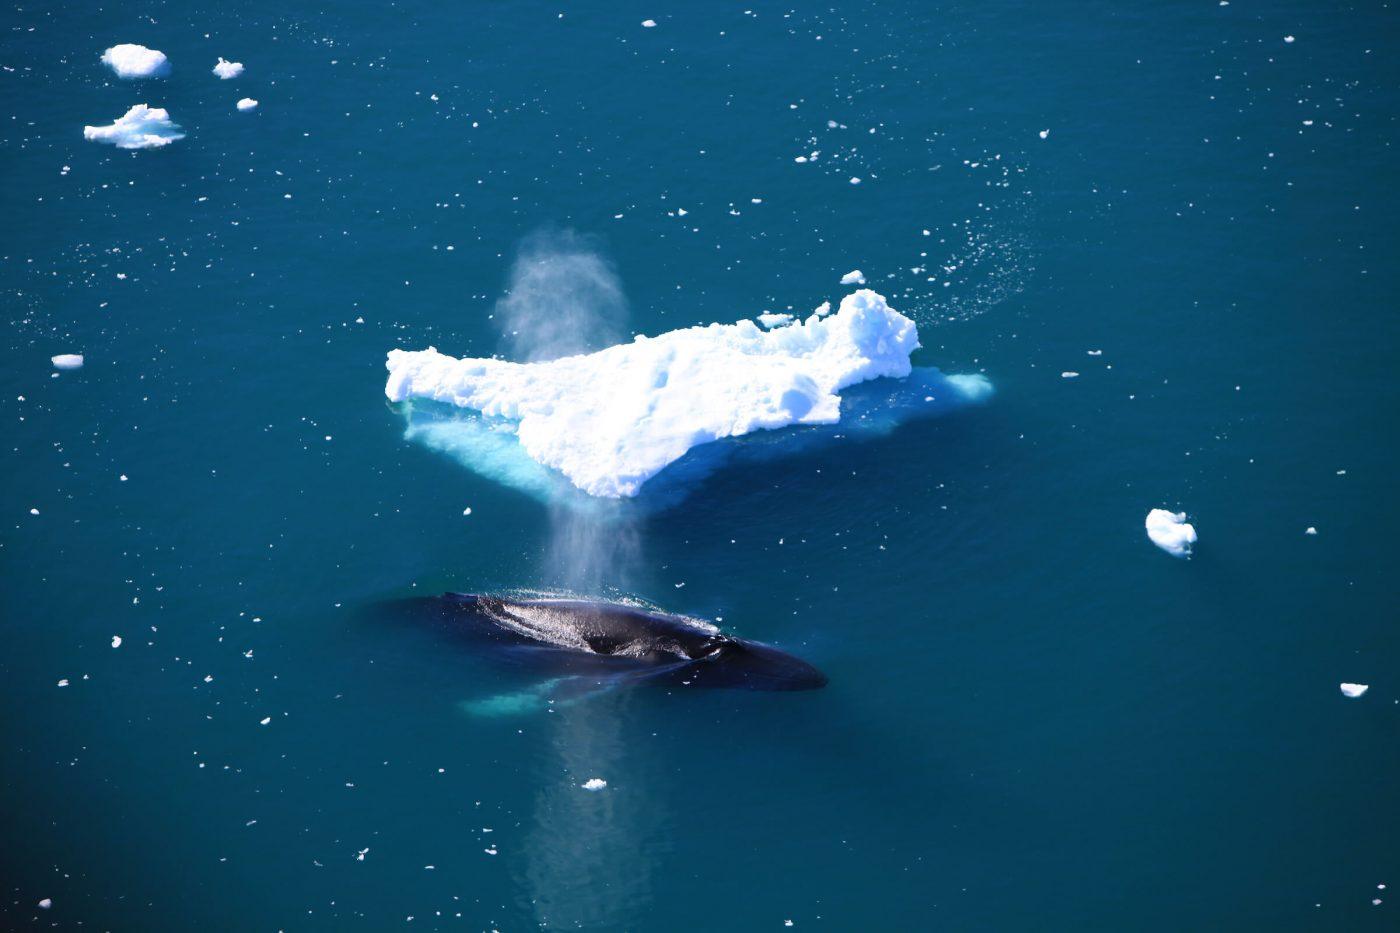 An aerial view of a humpback surfacing near Ilulissat in Greenland. By Anne Mette Christiansen